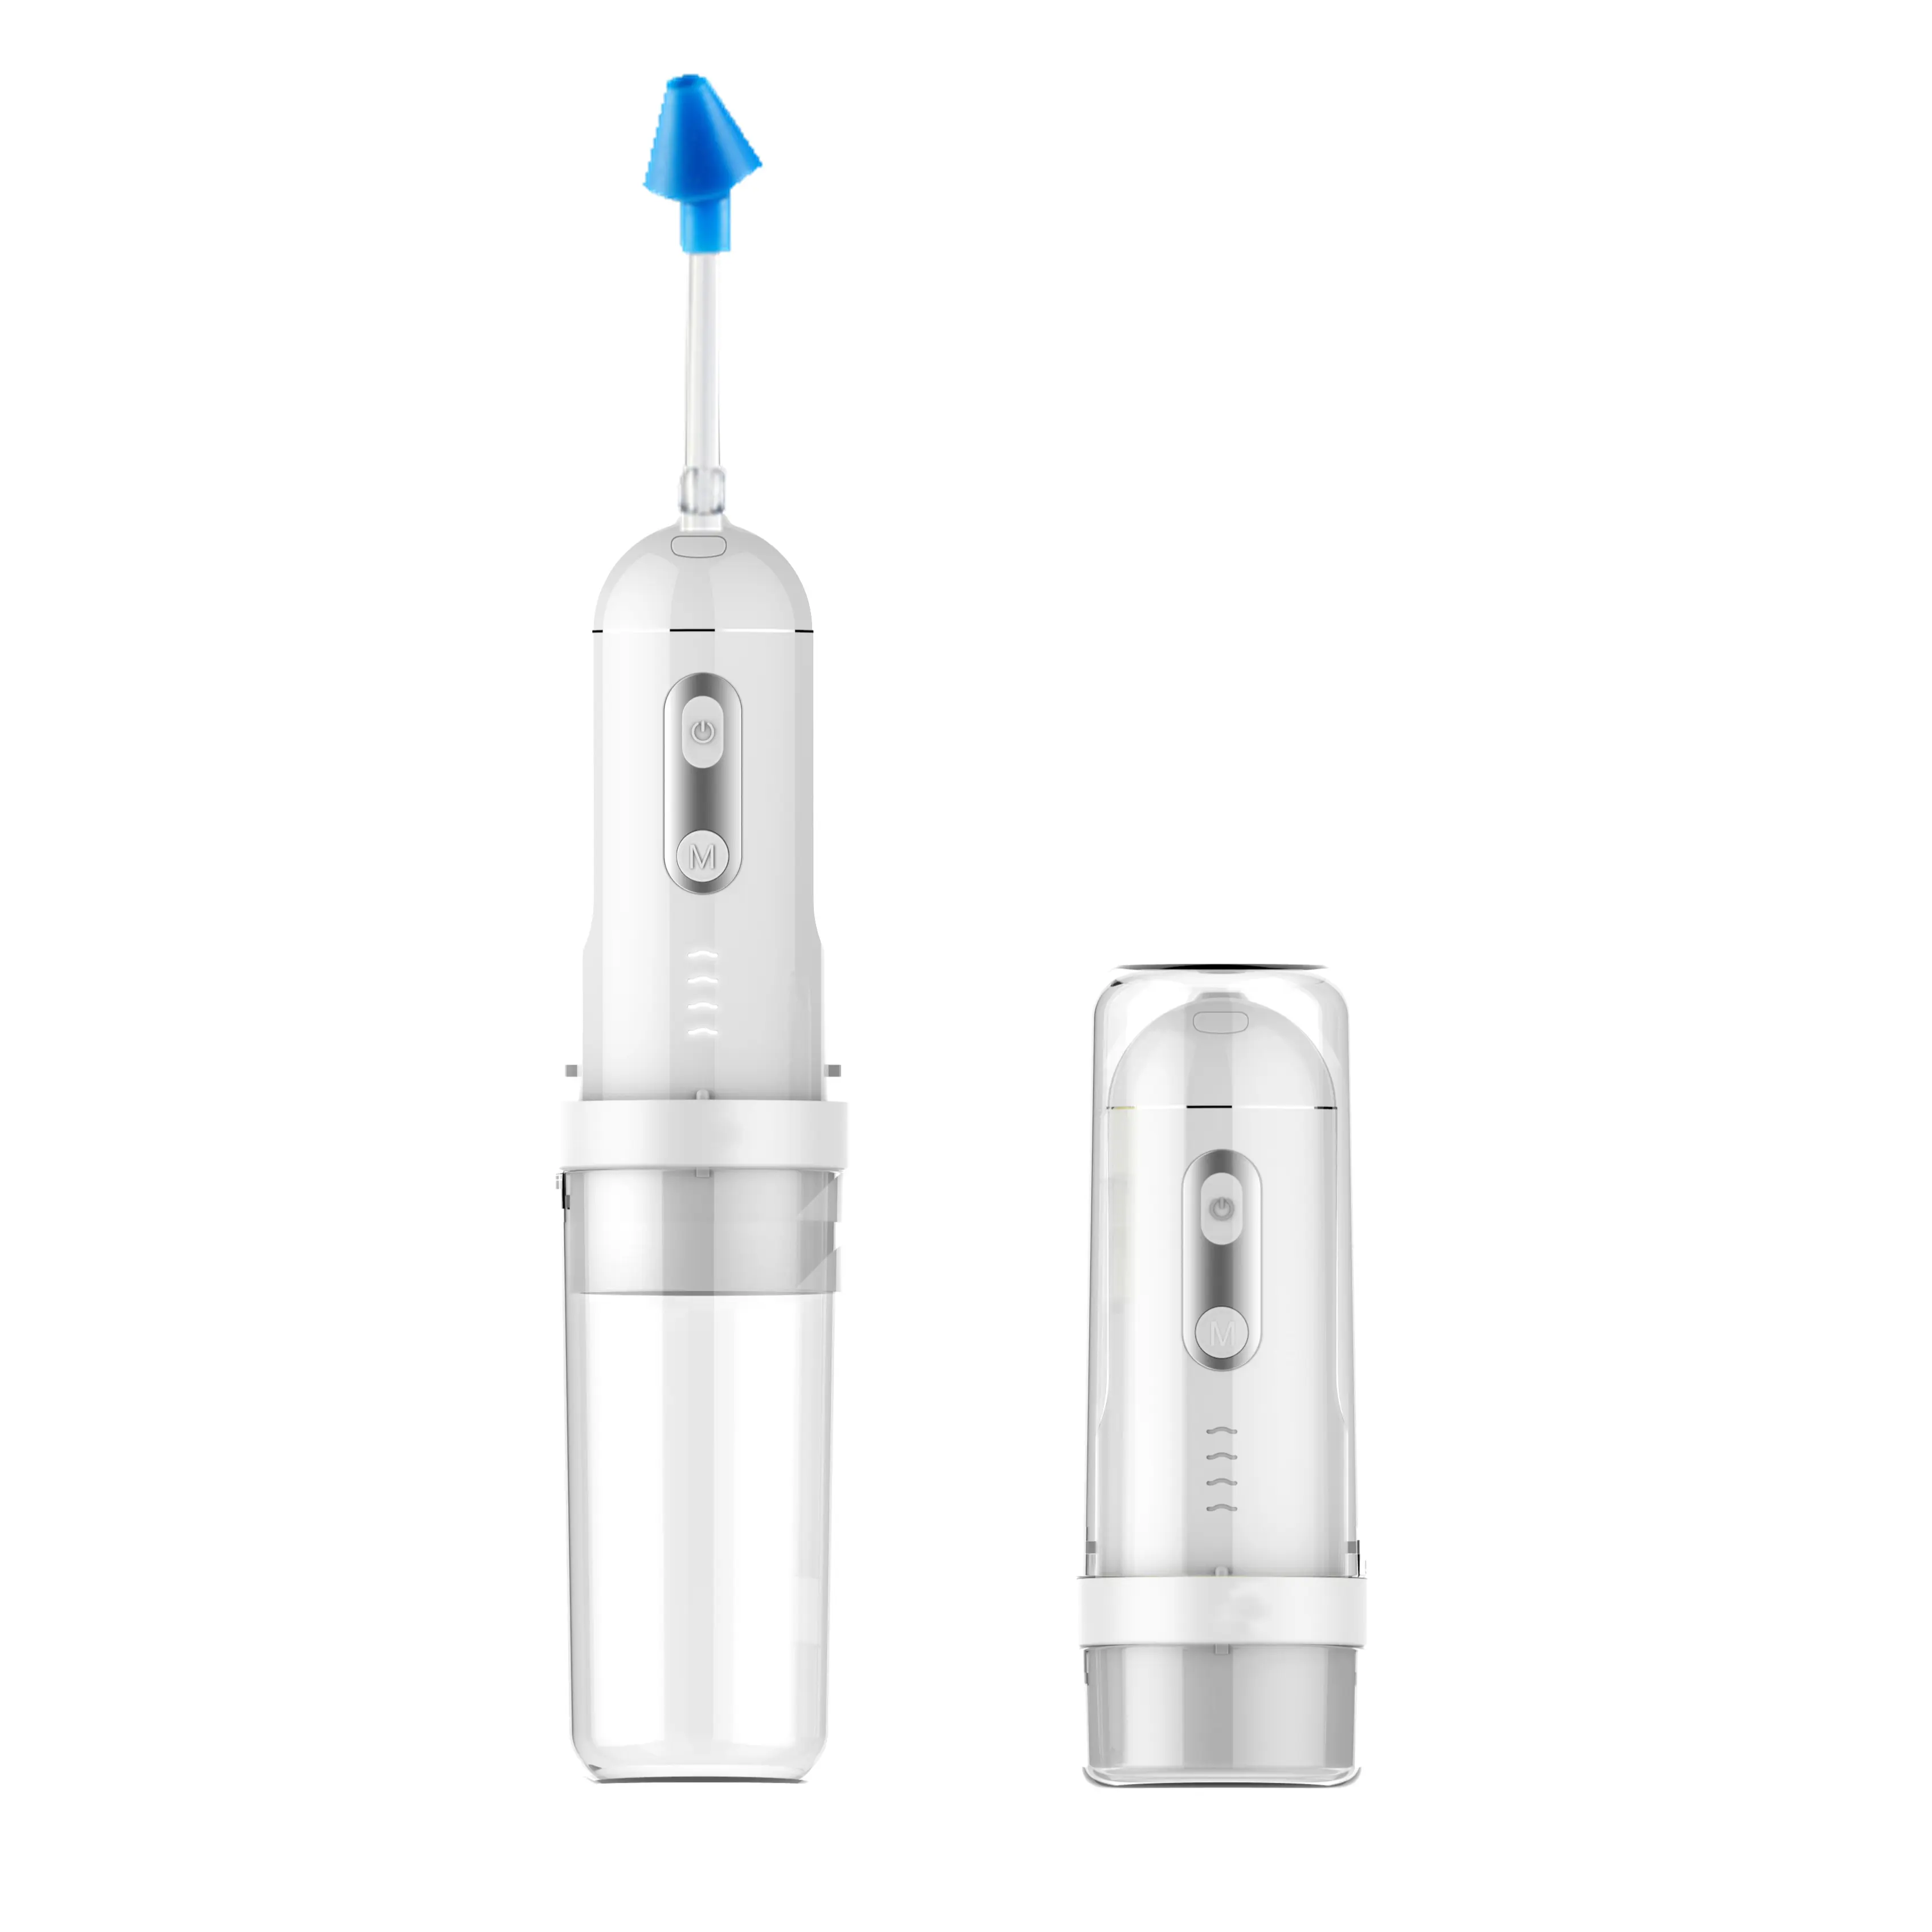 Waterproof Nasal Irrigator for Sinus Relief Nose Cleaner Aspirator System Low High Pulse Mode